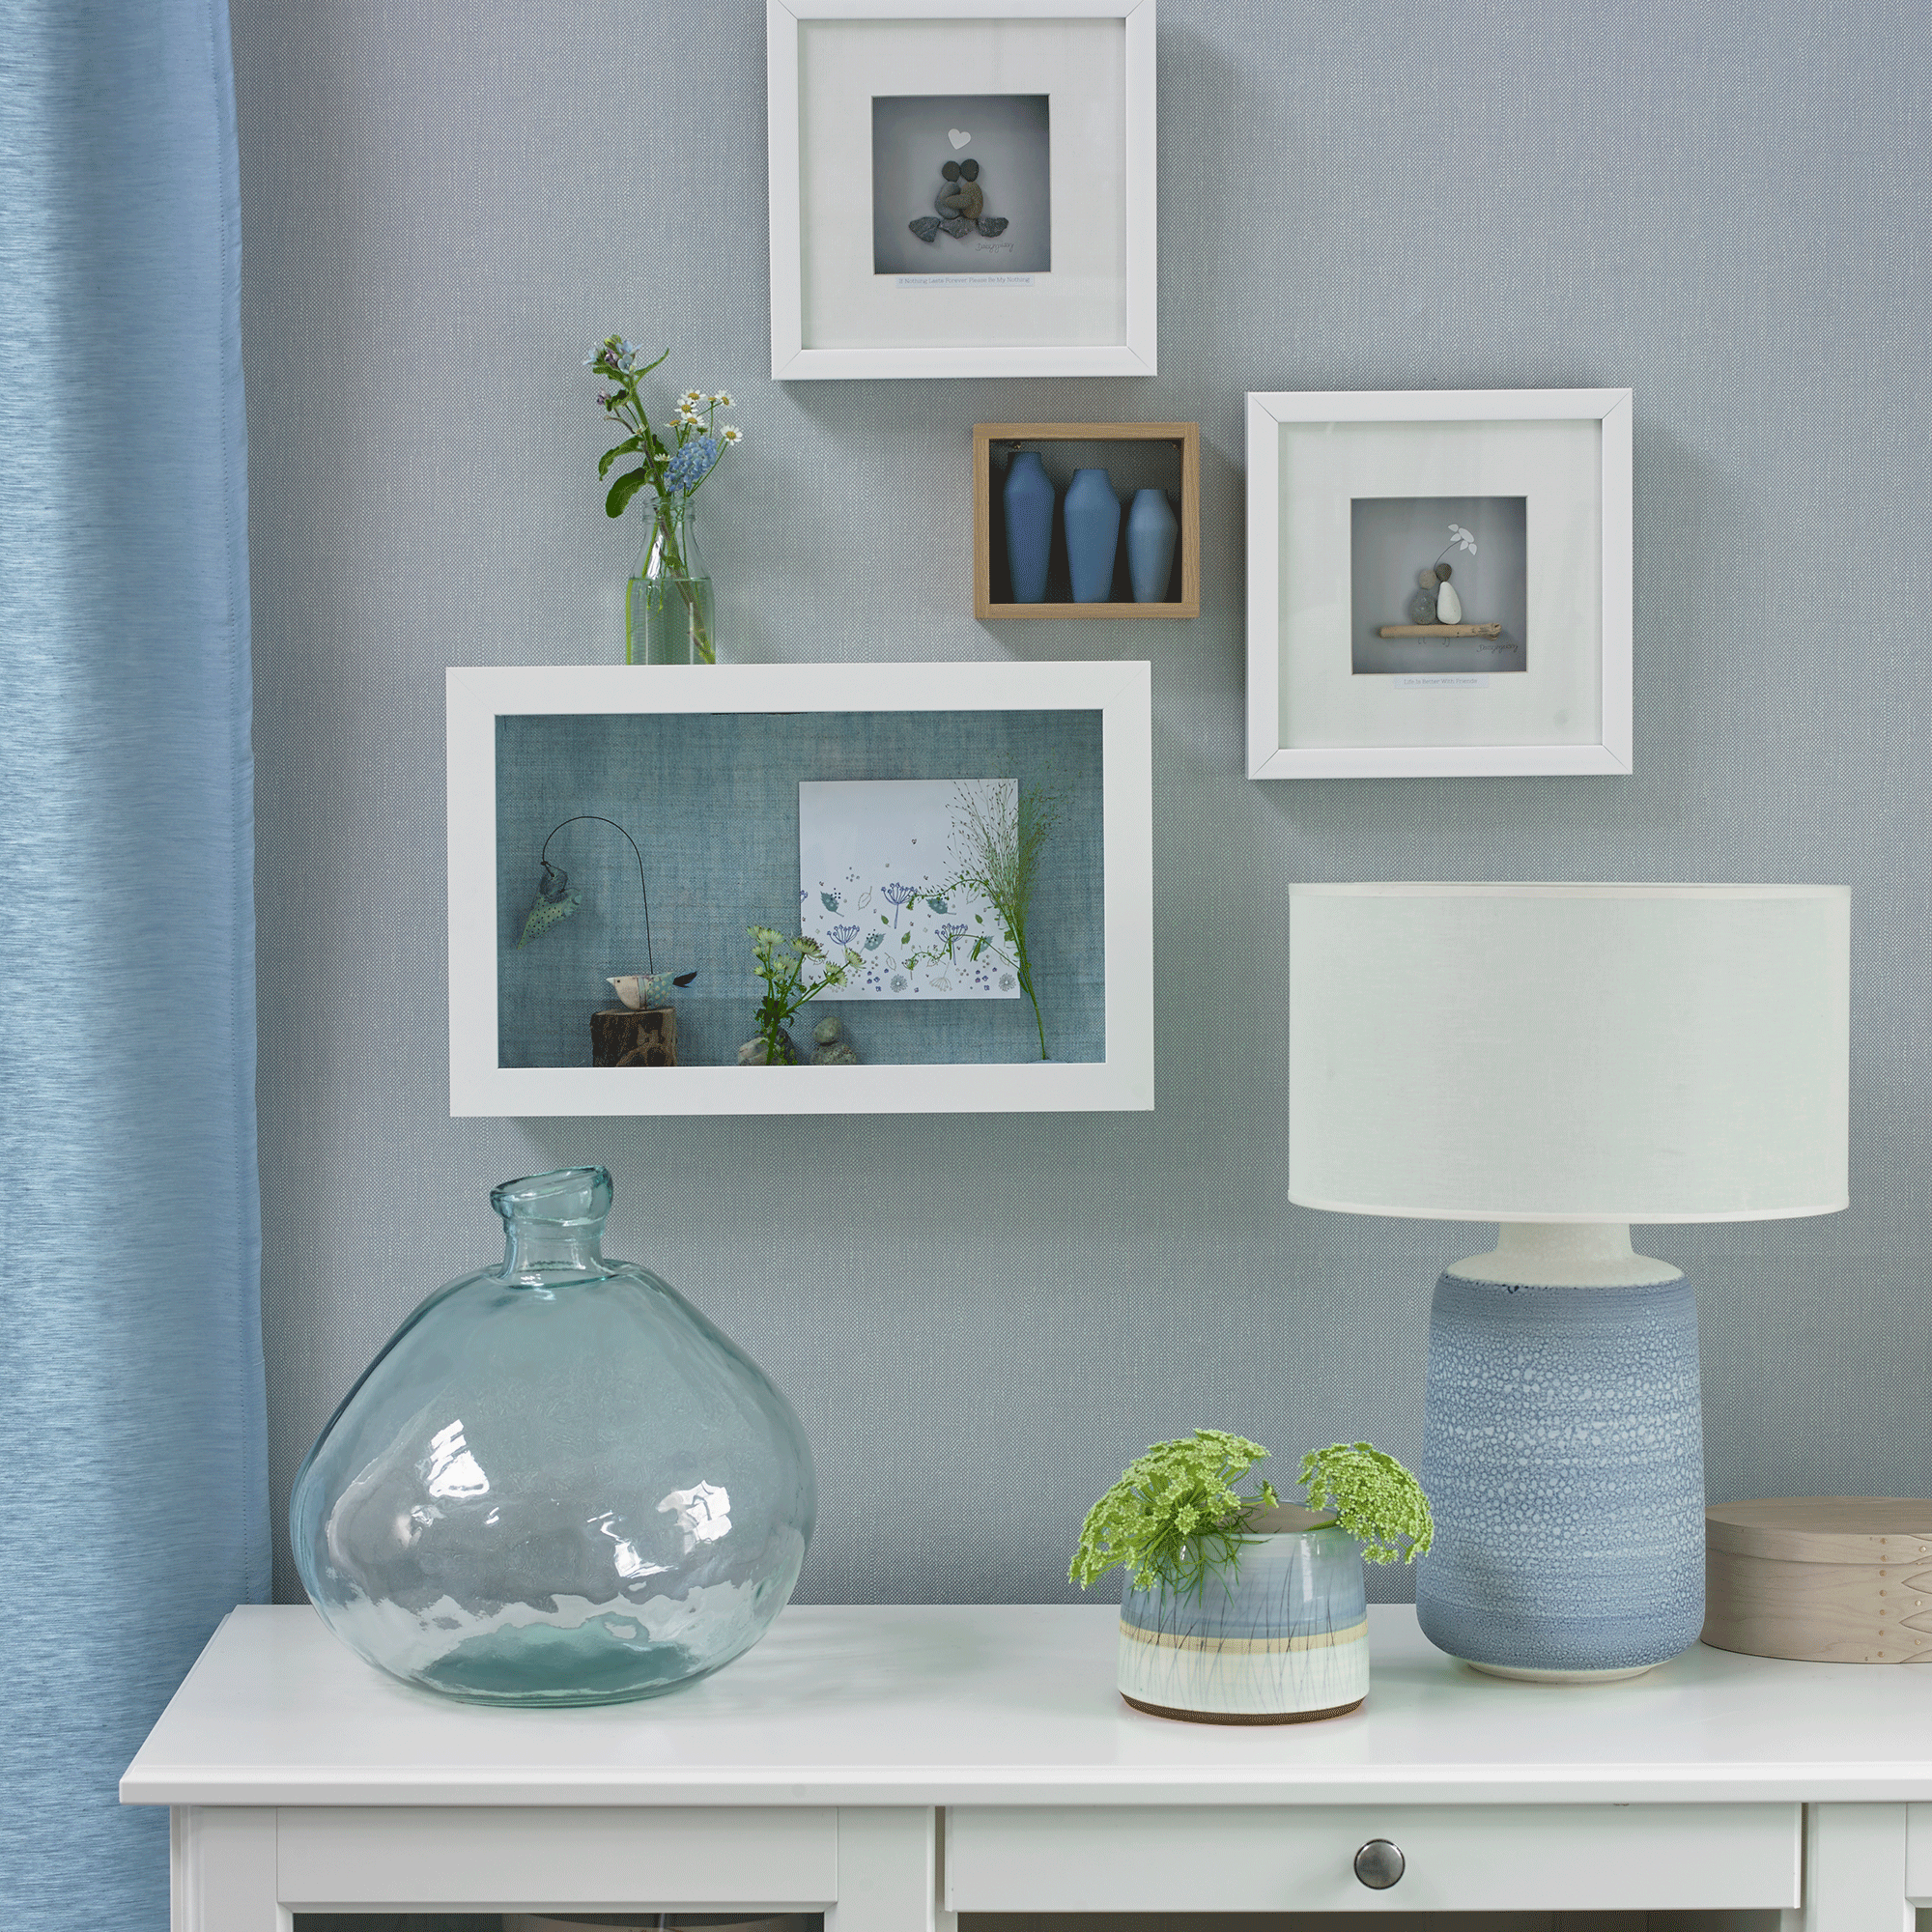 Blue lamp with white lampshade and wall art